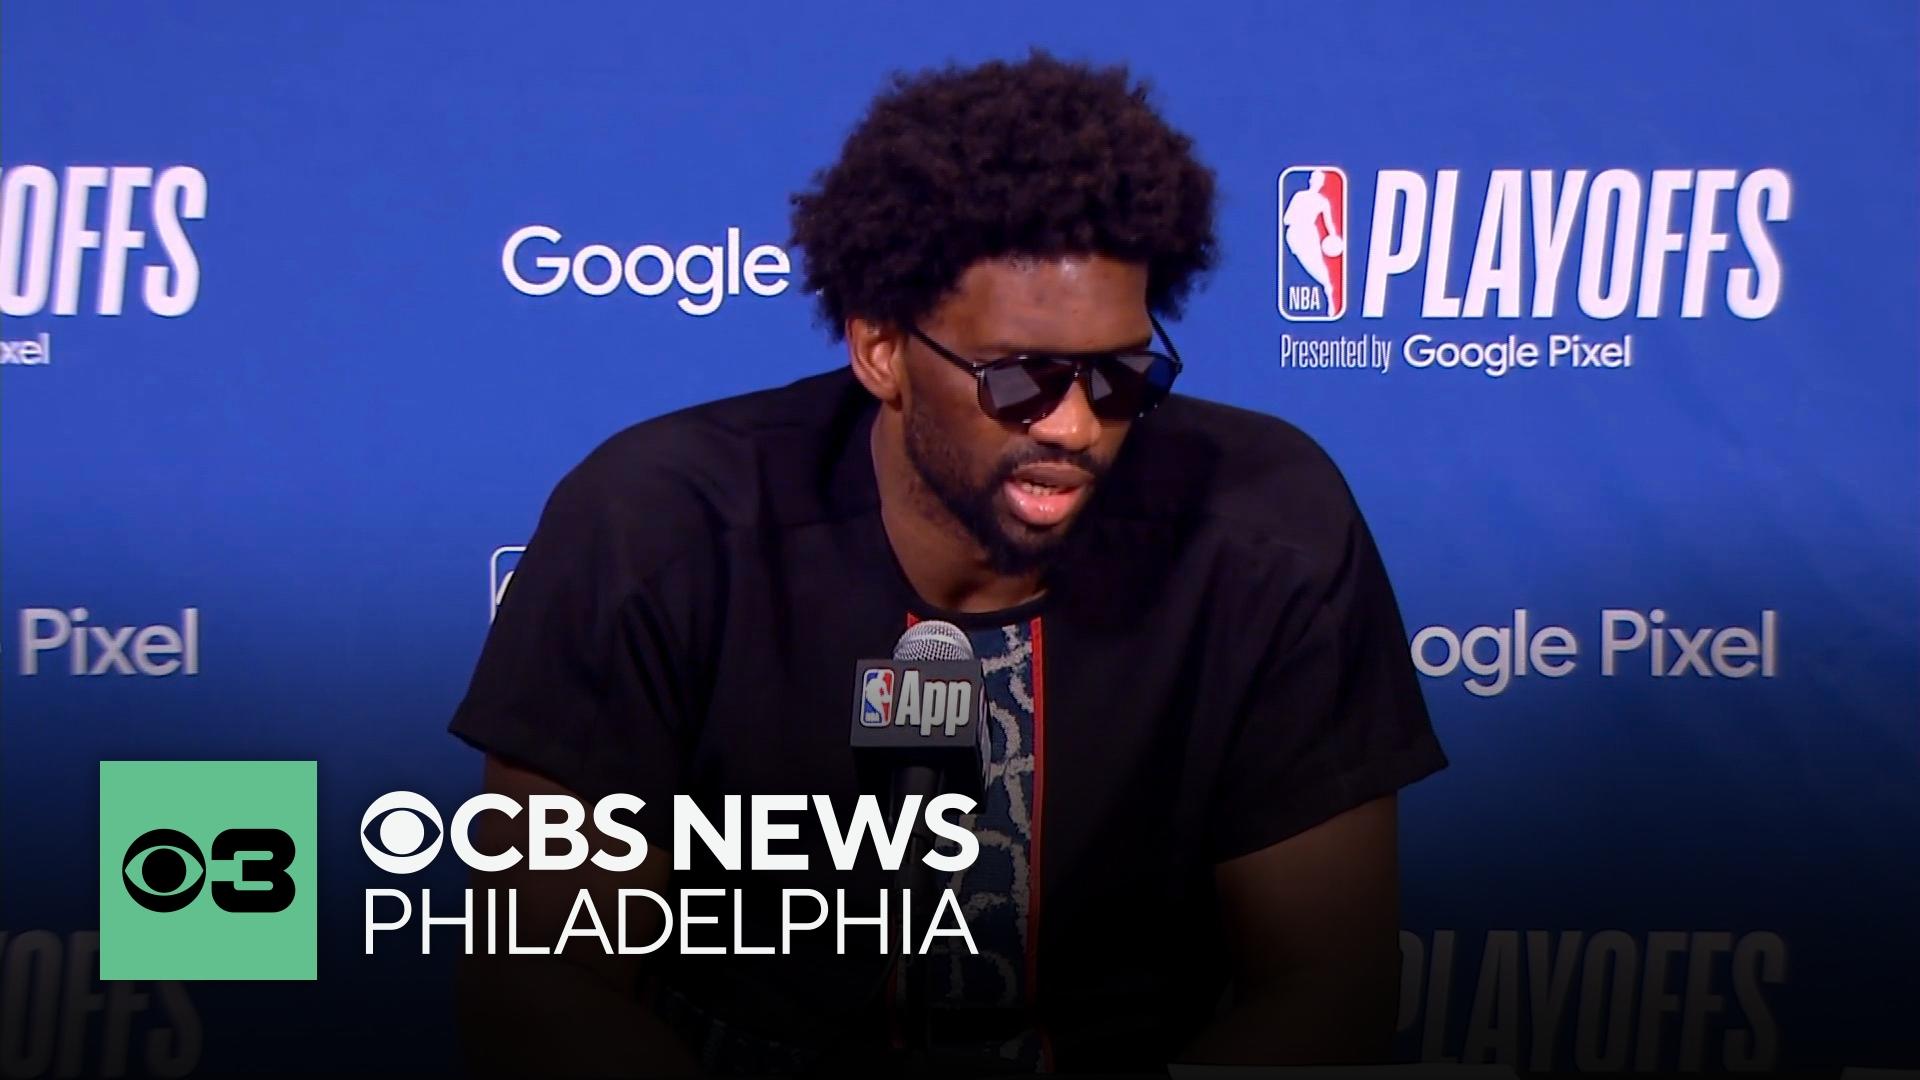 Sixers' Joel Embiid says he's being treated for Bell's palsy